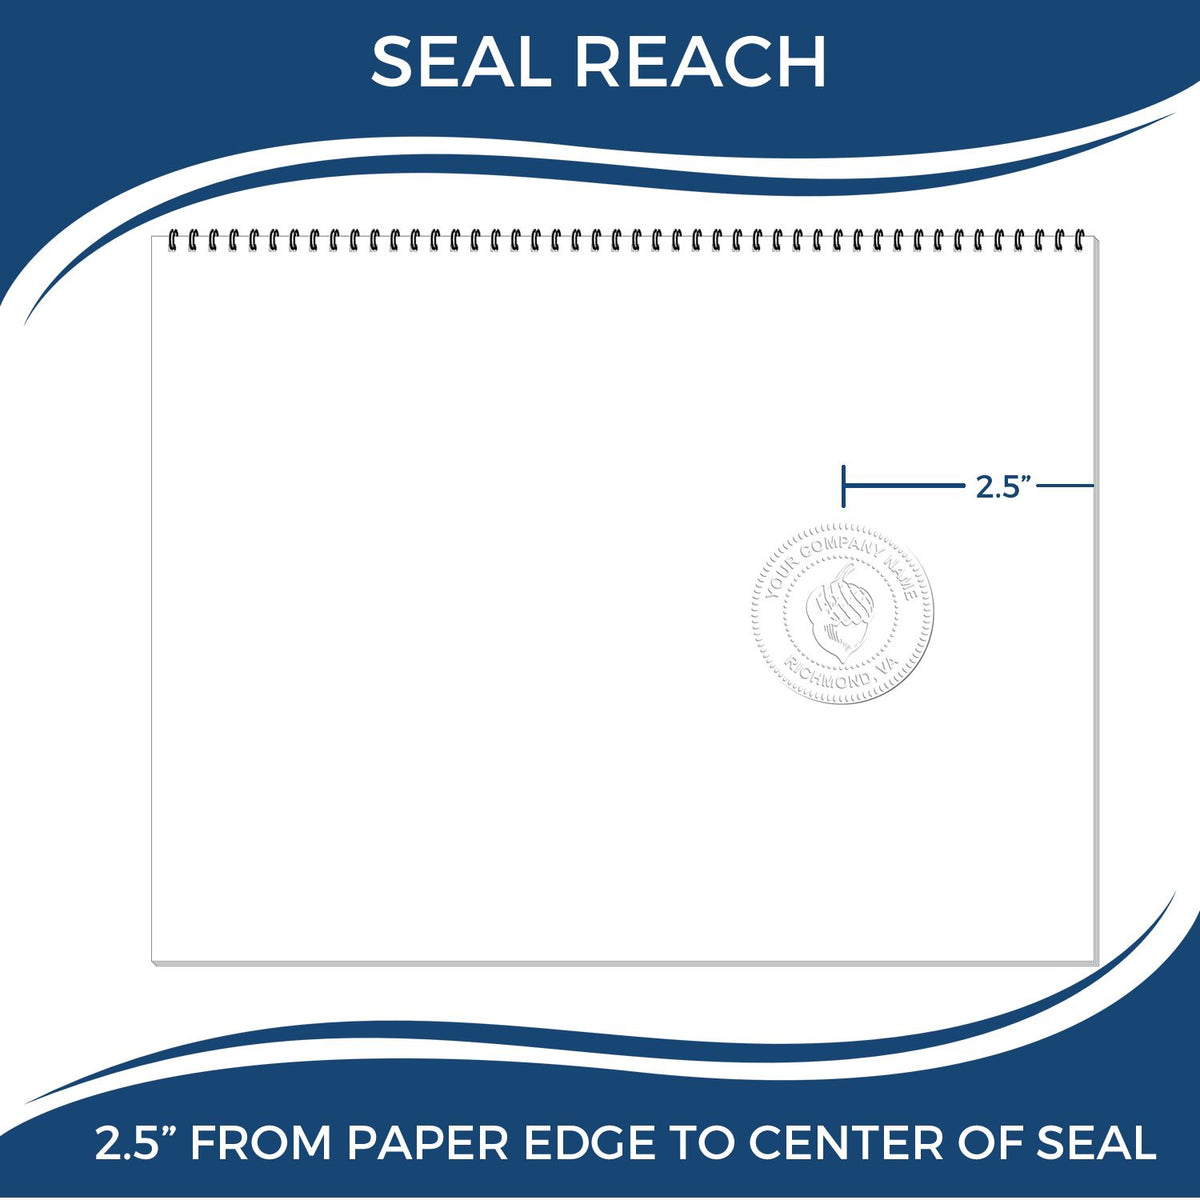 An infographic showing the seal reach which is represented by a ruler and a miniature seal image of the Heavy Duty Cast Iron Minnesota Land Surveyor Seal Embosser